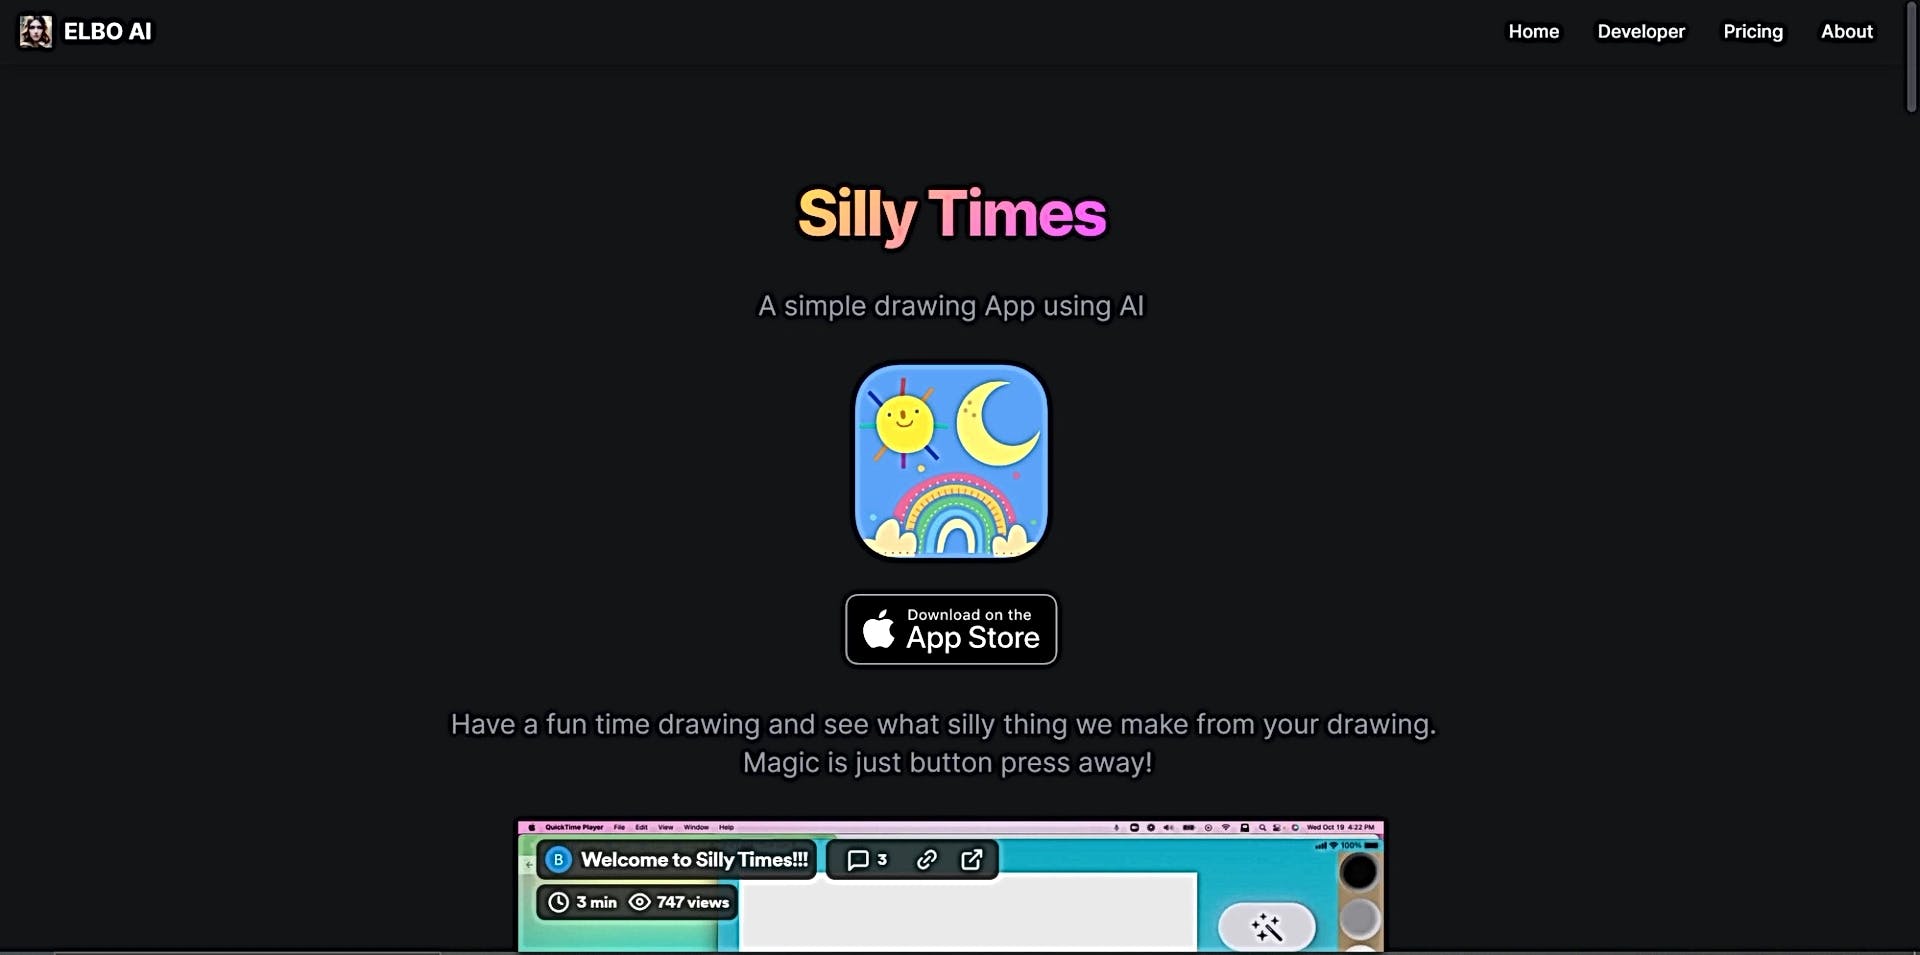 Silly Times featured